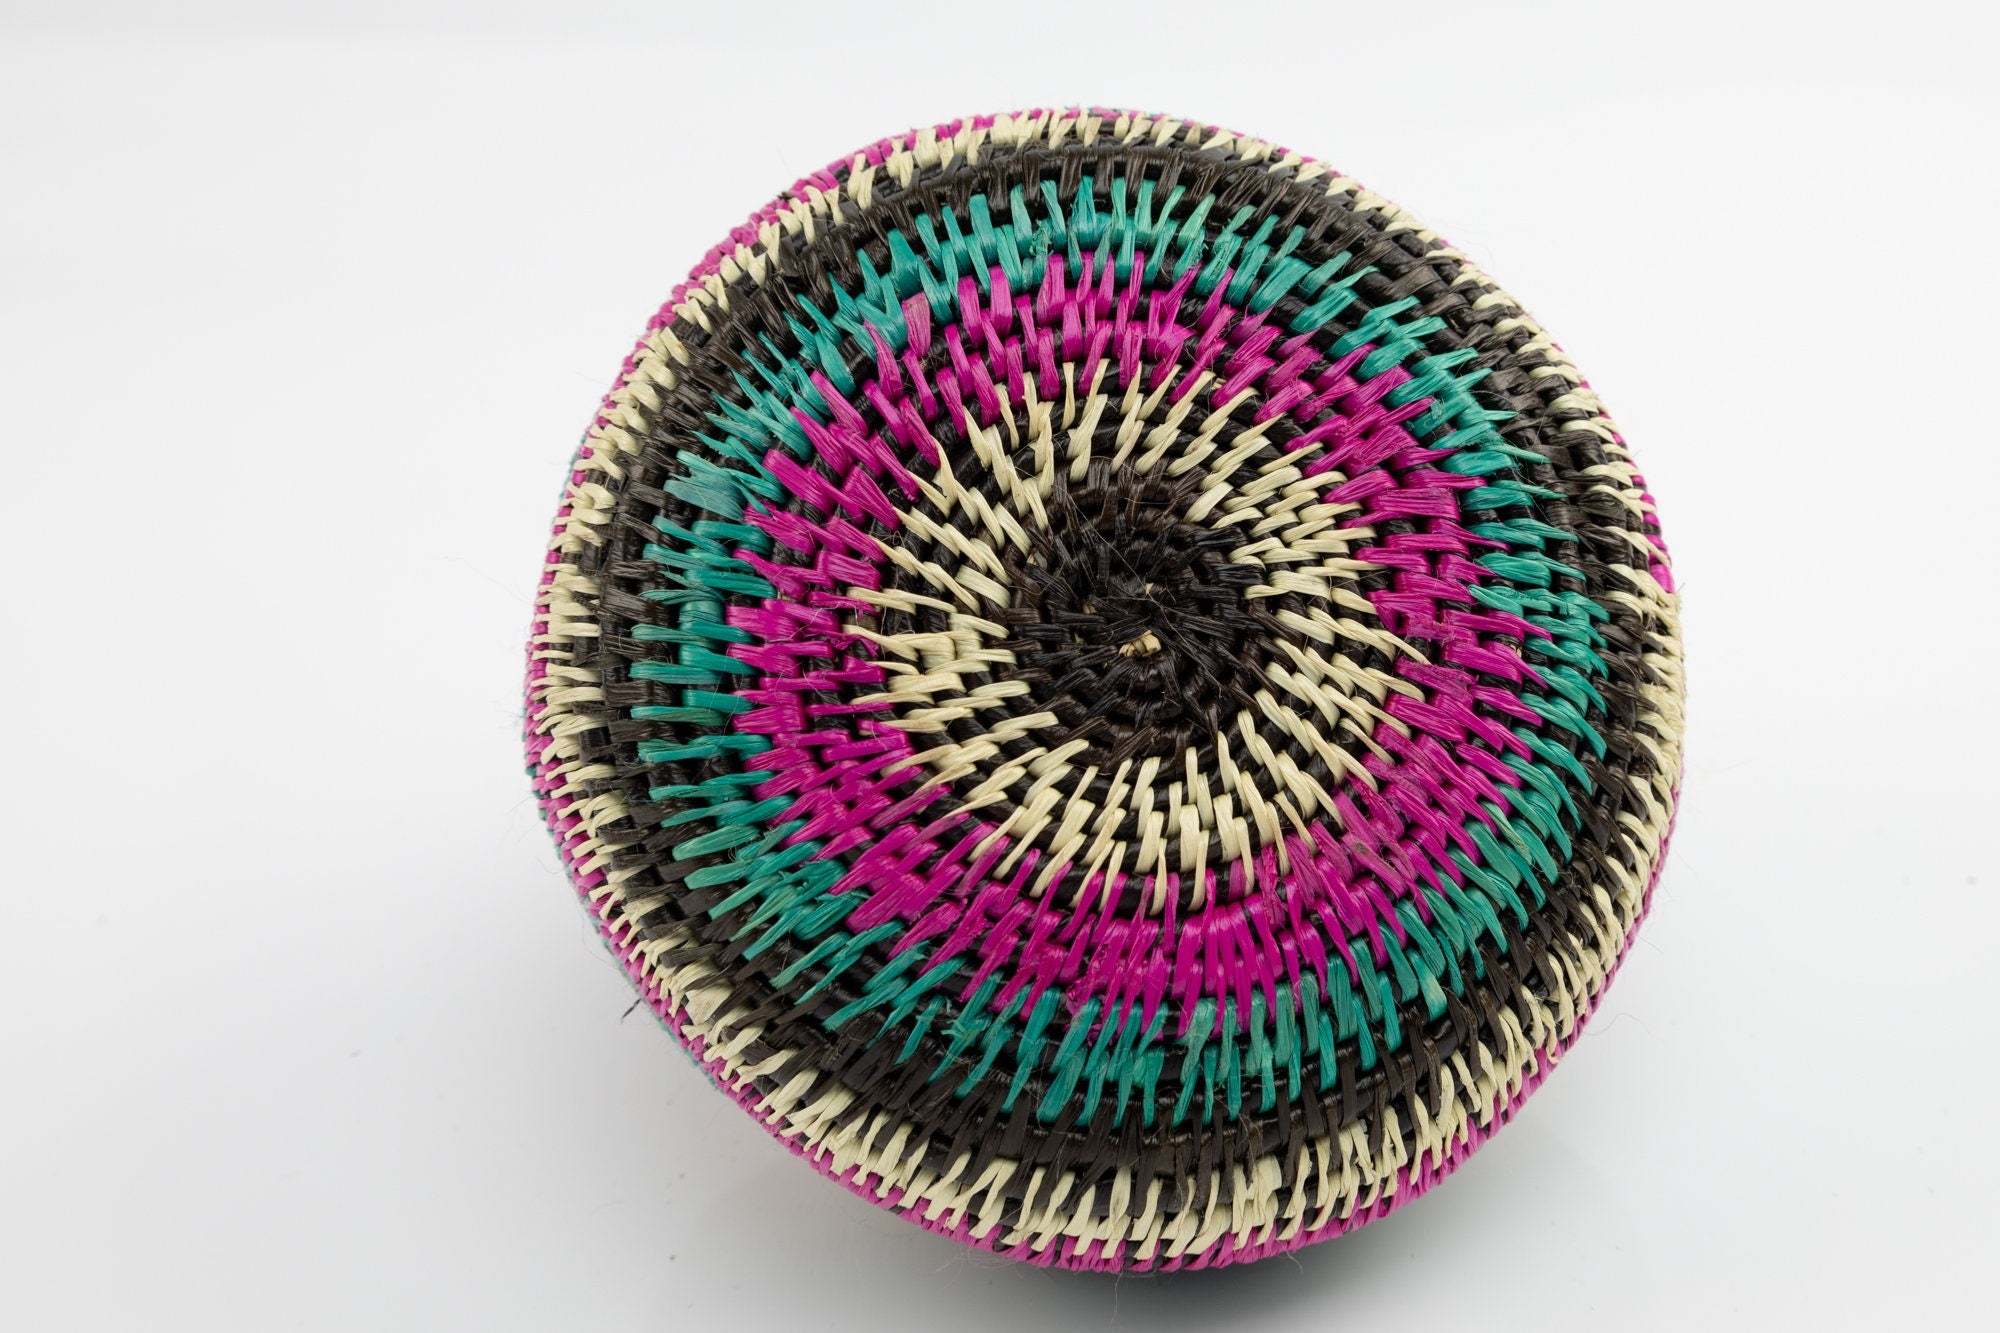 Hand Woven Special Color Basket Made By Wounaan And Emberá Panama Indians. Bowl Basket, Woven Basket, Basket Decor, Woven Storage